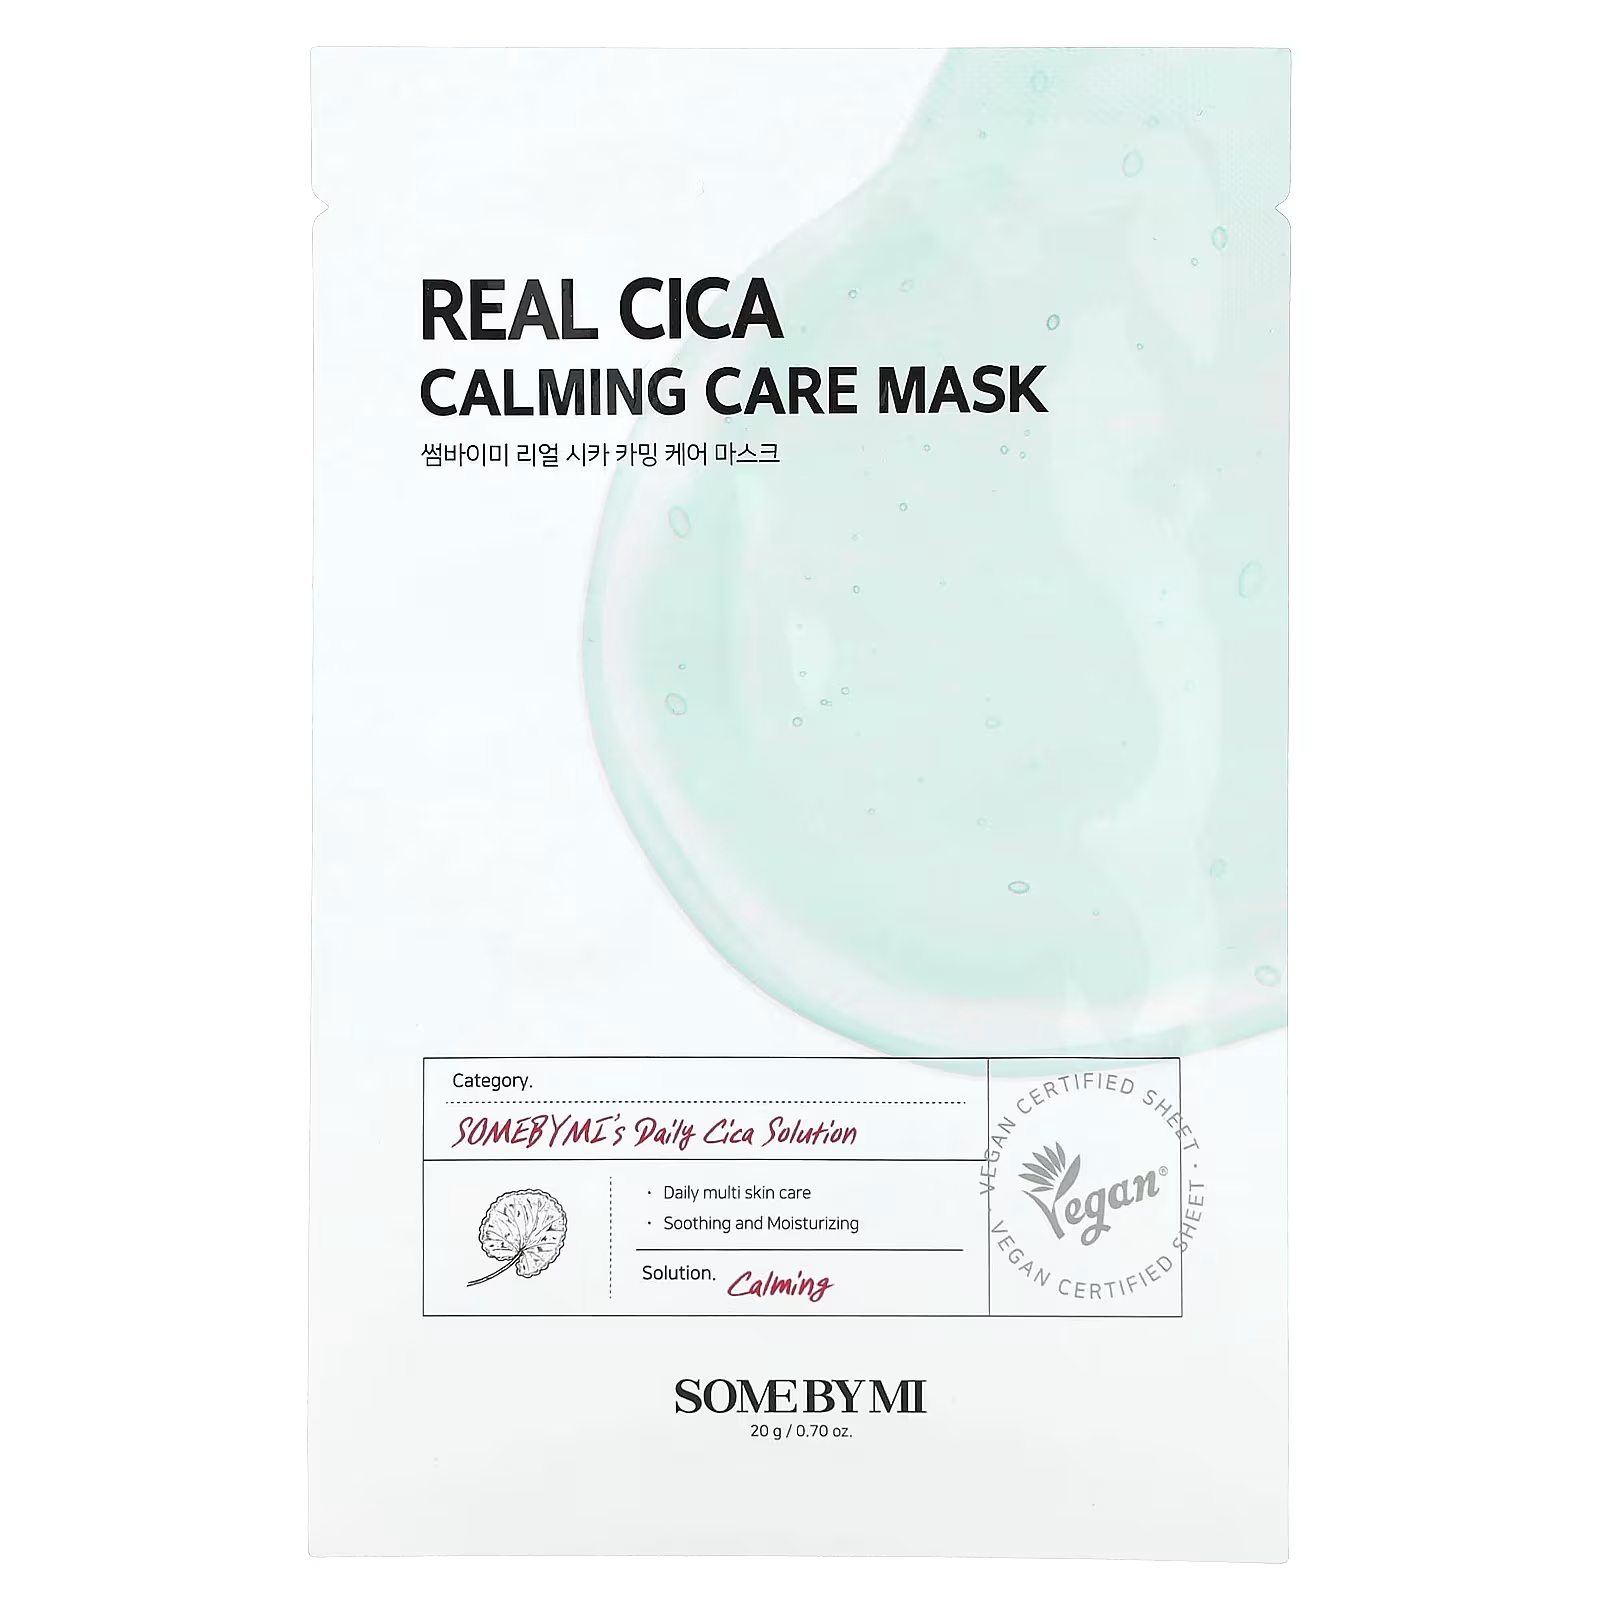 SOME BY MI Real Cica Calming Care Beauty Mask, 1 лист, 0,70 унции (20 г) some by mi real cica calming care mask